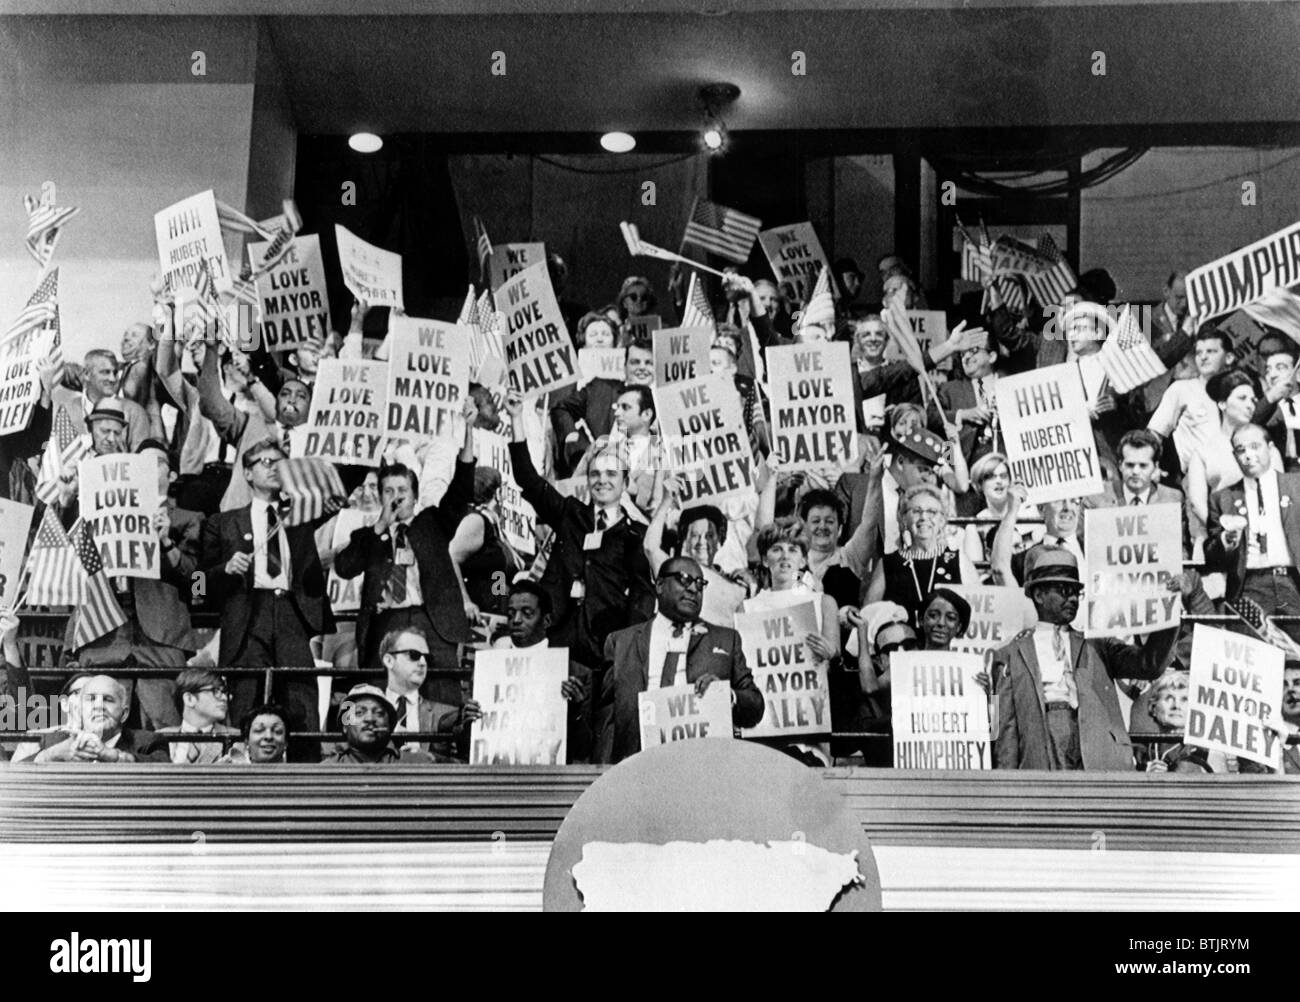 Richard J. Daley supporters, National Democratic Convention, Chicago, IL, 08-29-1968. Stock Photo